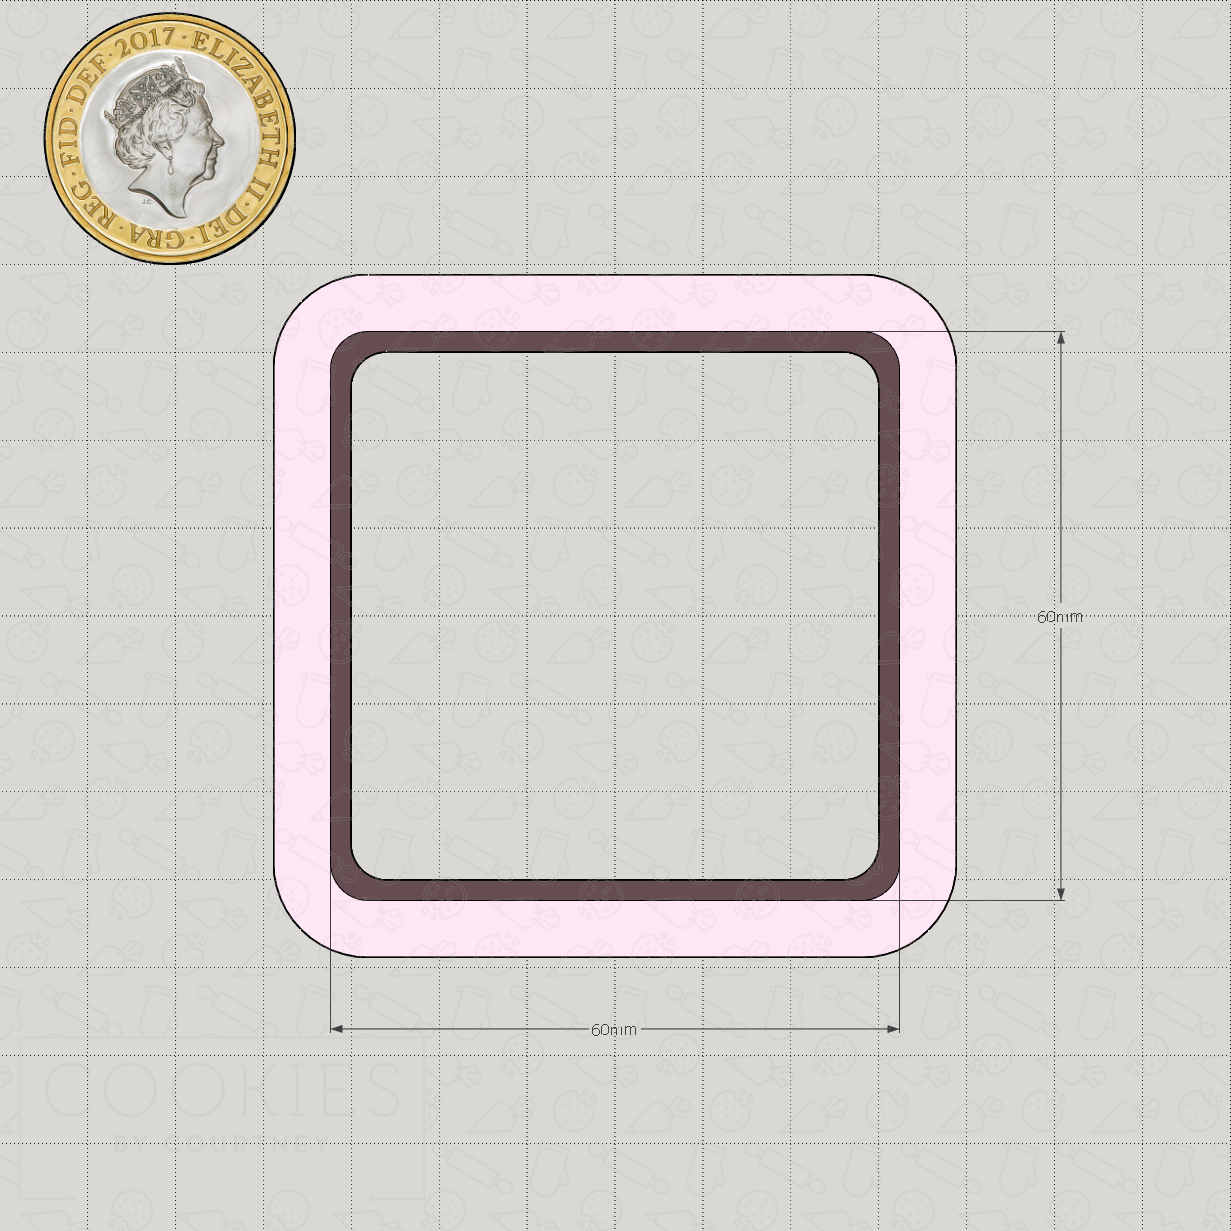 Basic Shapes - Square - Rounded Corners - Cookie Cutter